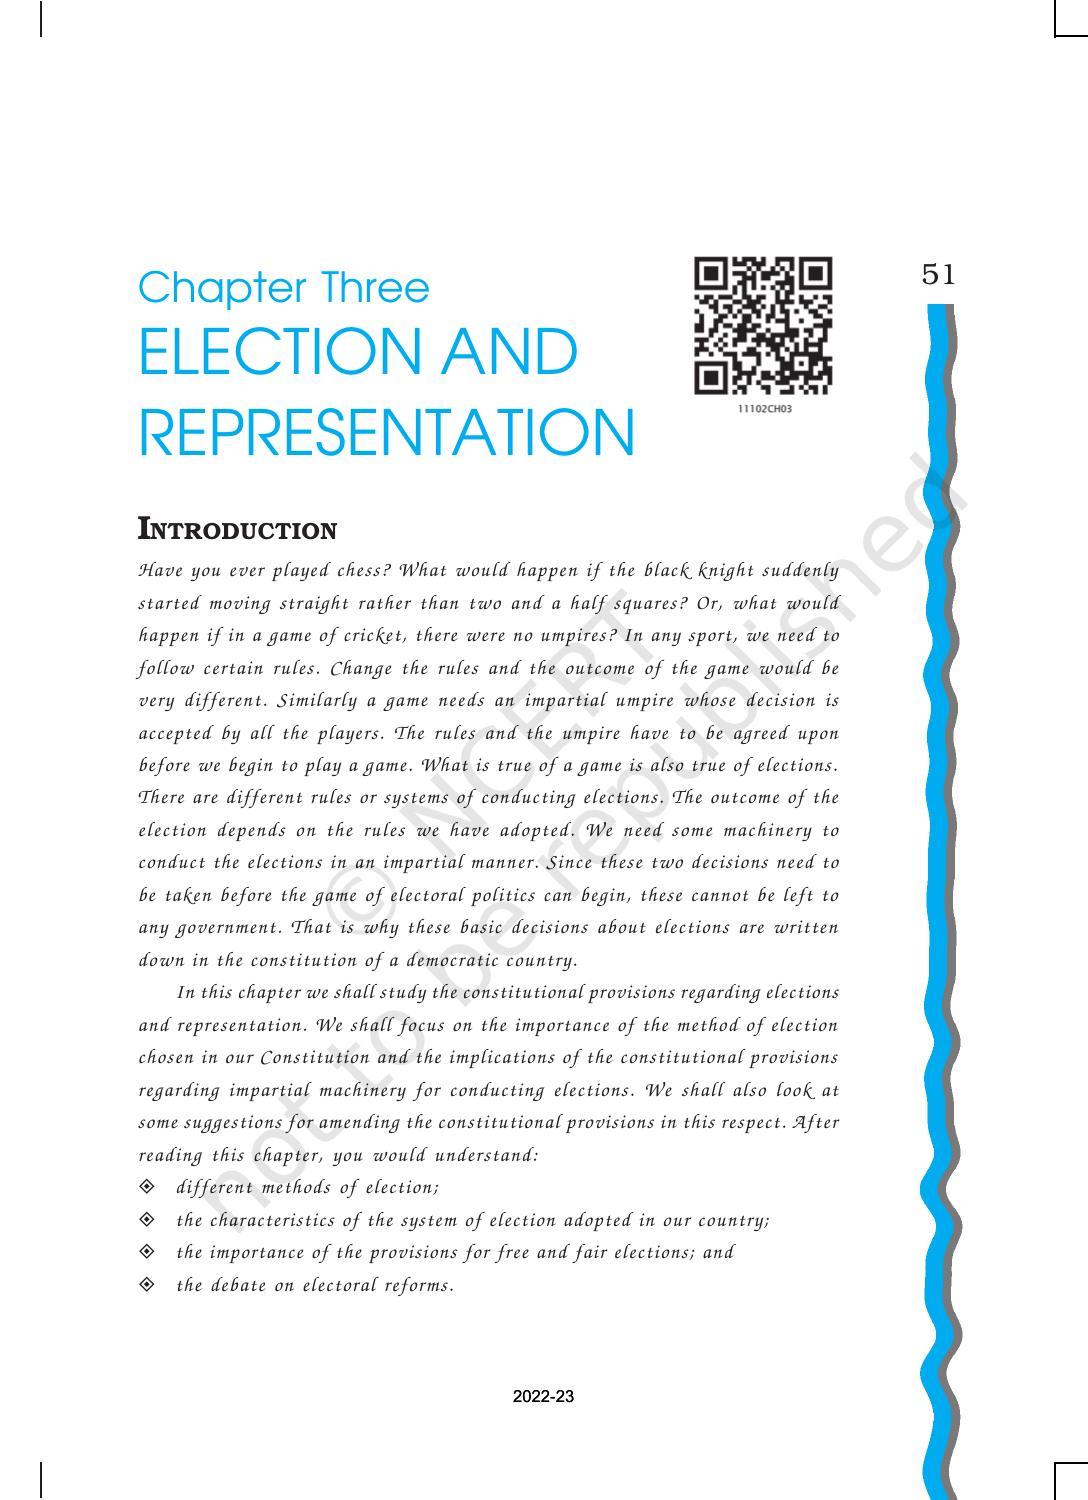 NCERT Book for Class 11 Political Science (Indian Constitution at Work) Chapter 3 Election and Representation - Page 1